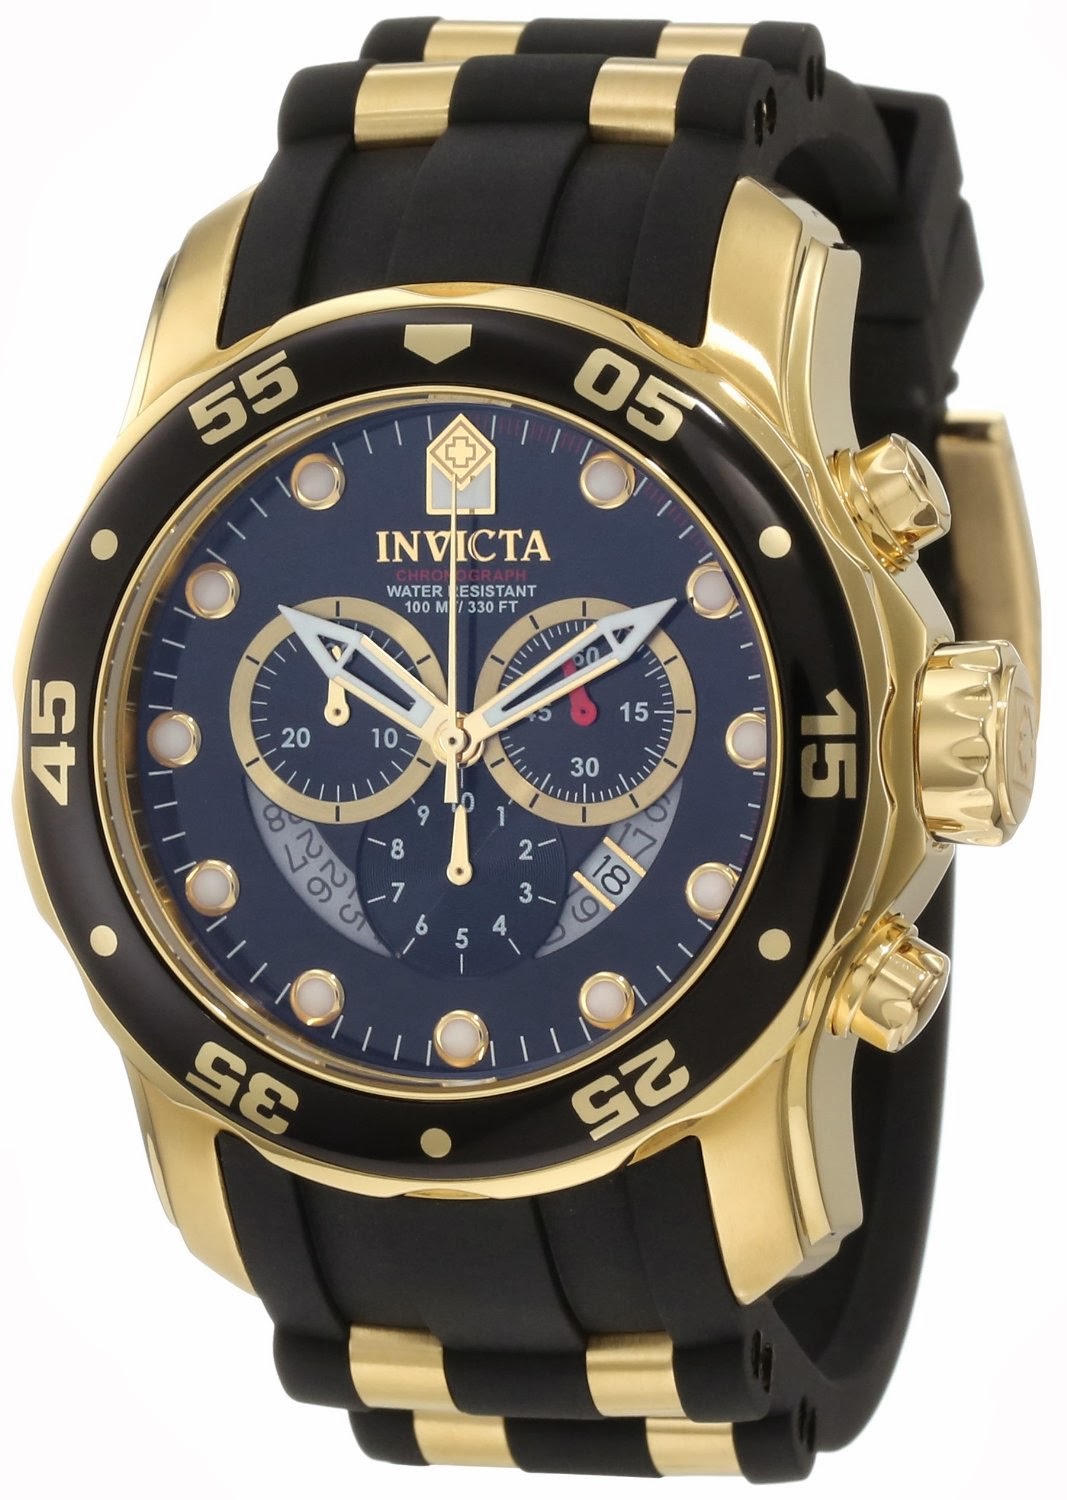 ... we proud to present the dive watches from invicta this is invicta men